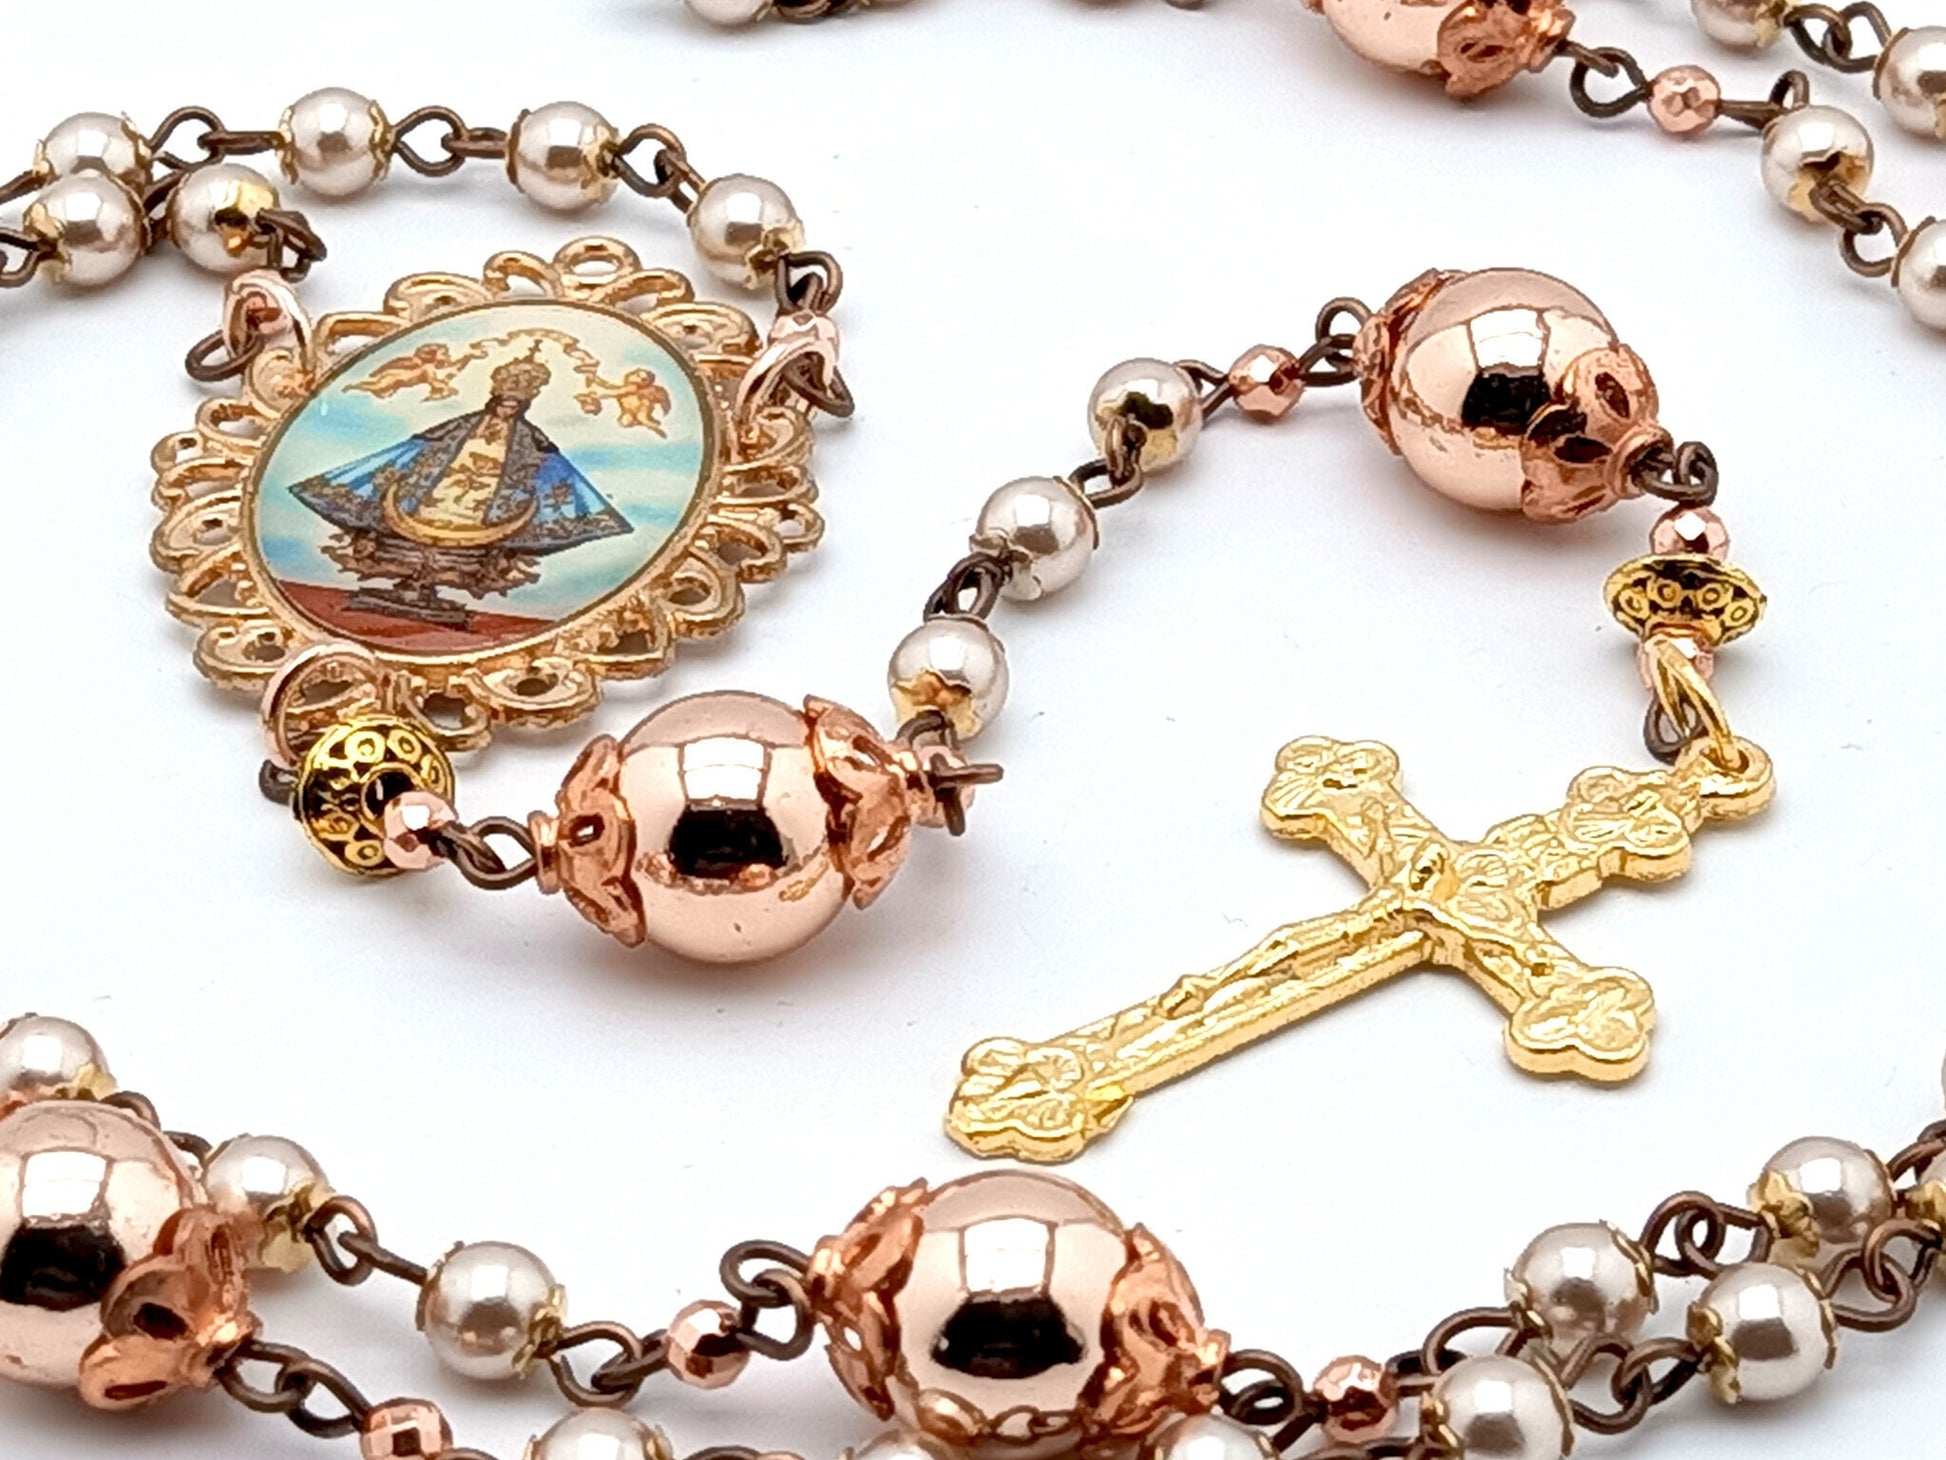 Our Lady of Charity unique rosary beads with rose gold hematite beads, golden Holy Trinity crucifix and picture centre medal.